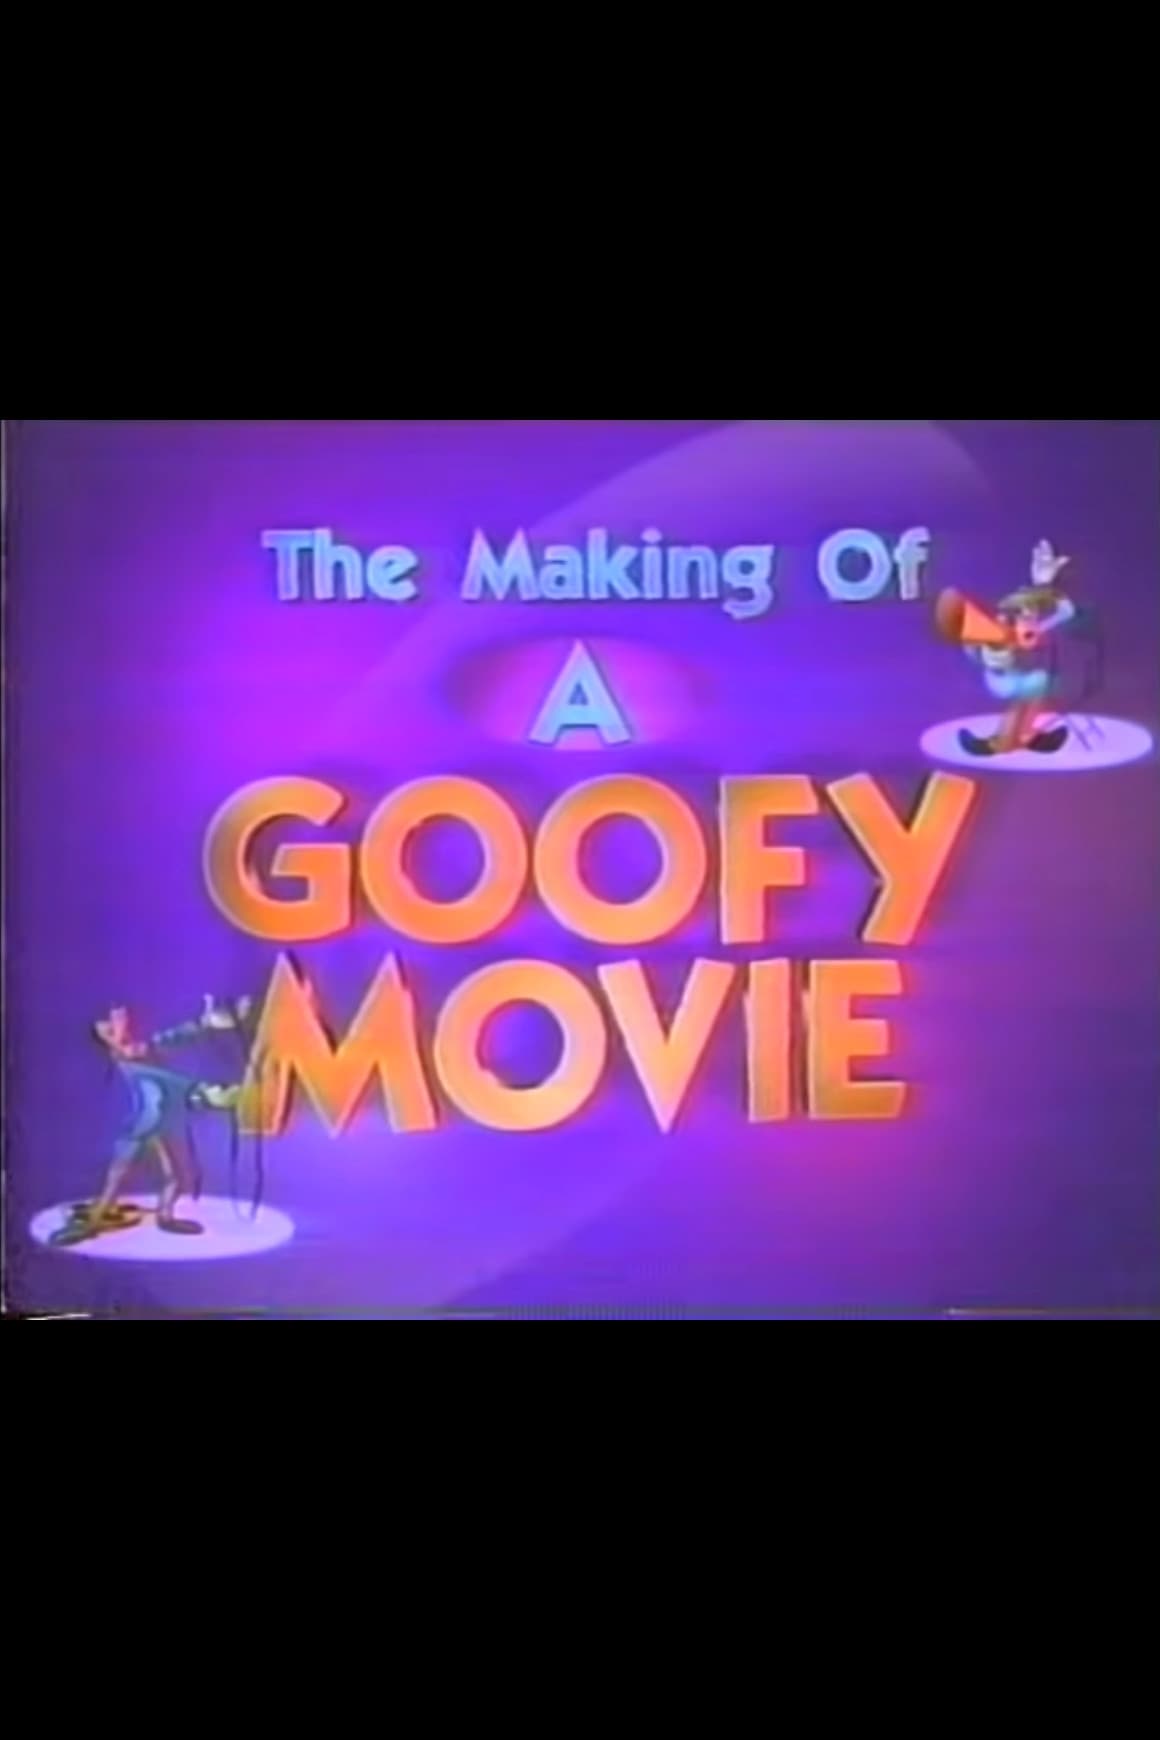 The Making of A Goofy Movie